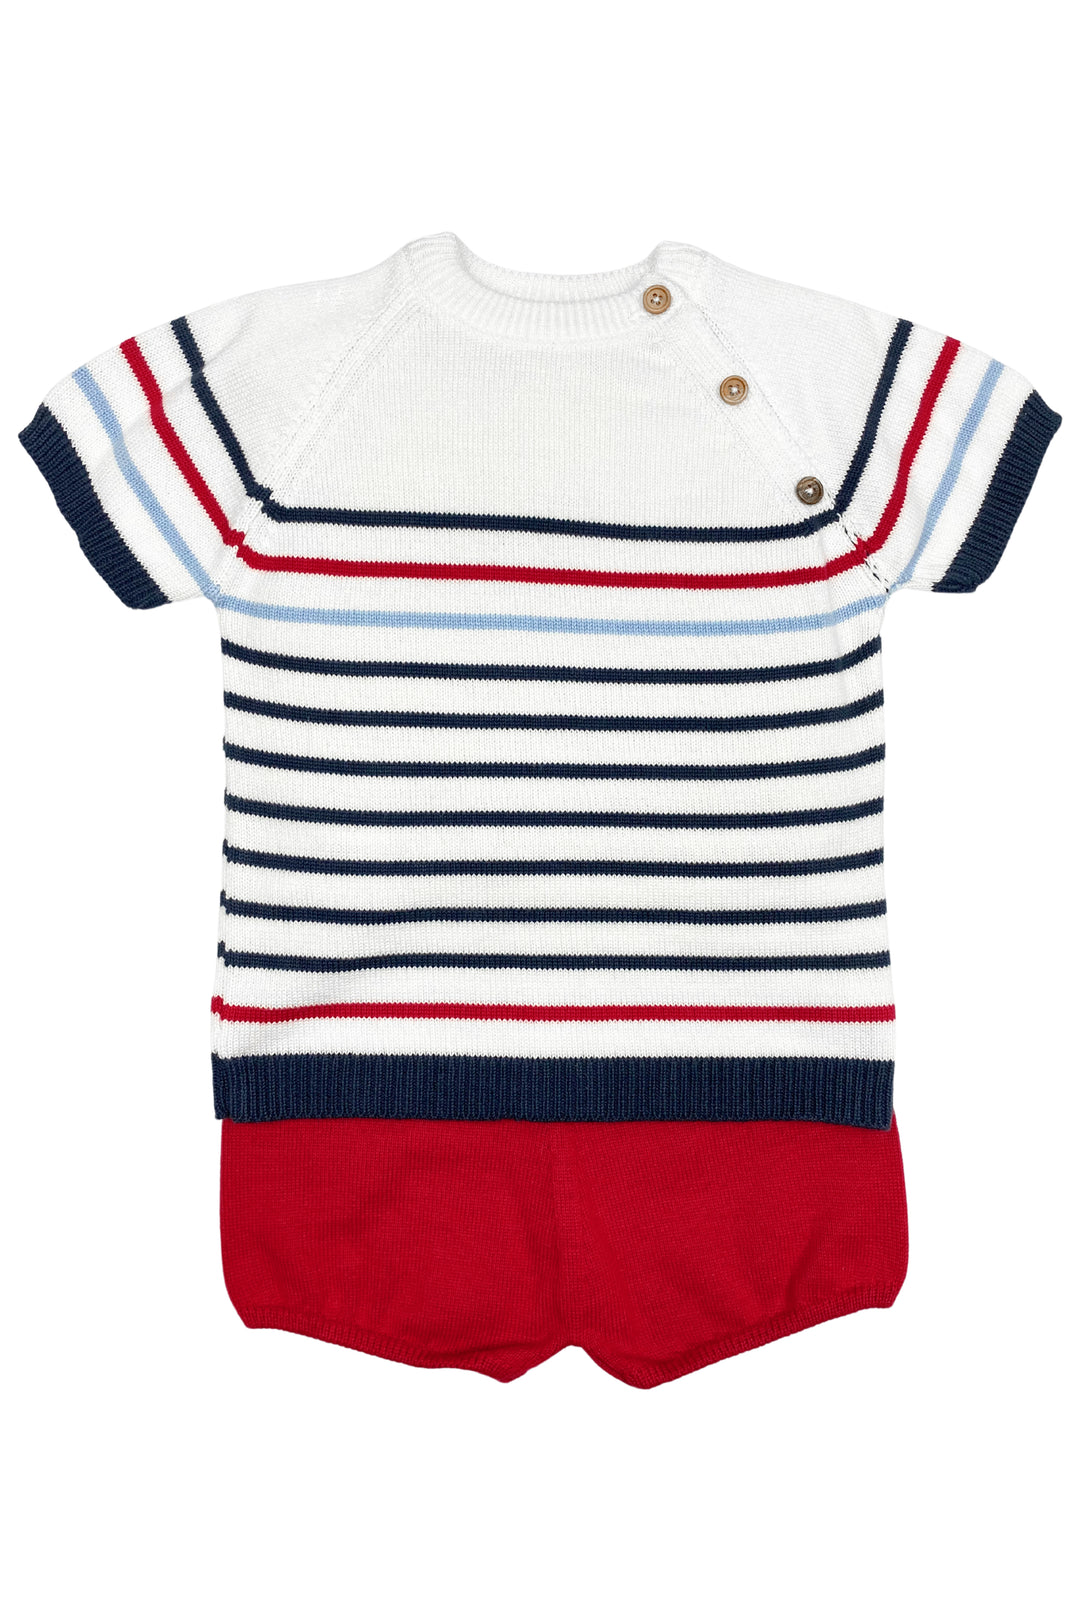 Granlei "Casper" Navy & Red Striped Knit Top & Shorts | iphoneandroidapplications